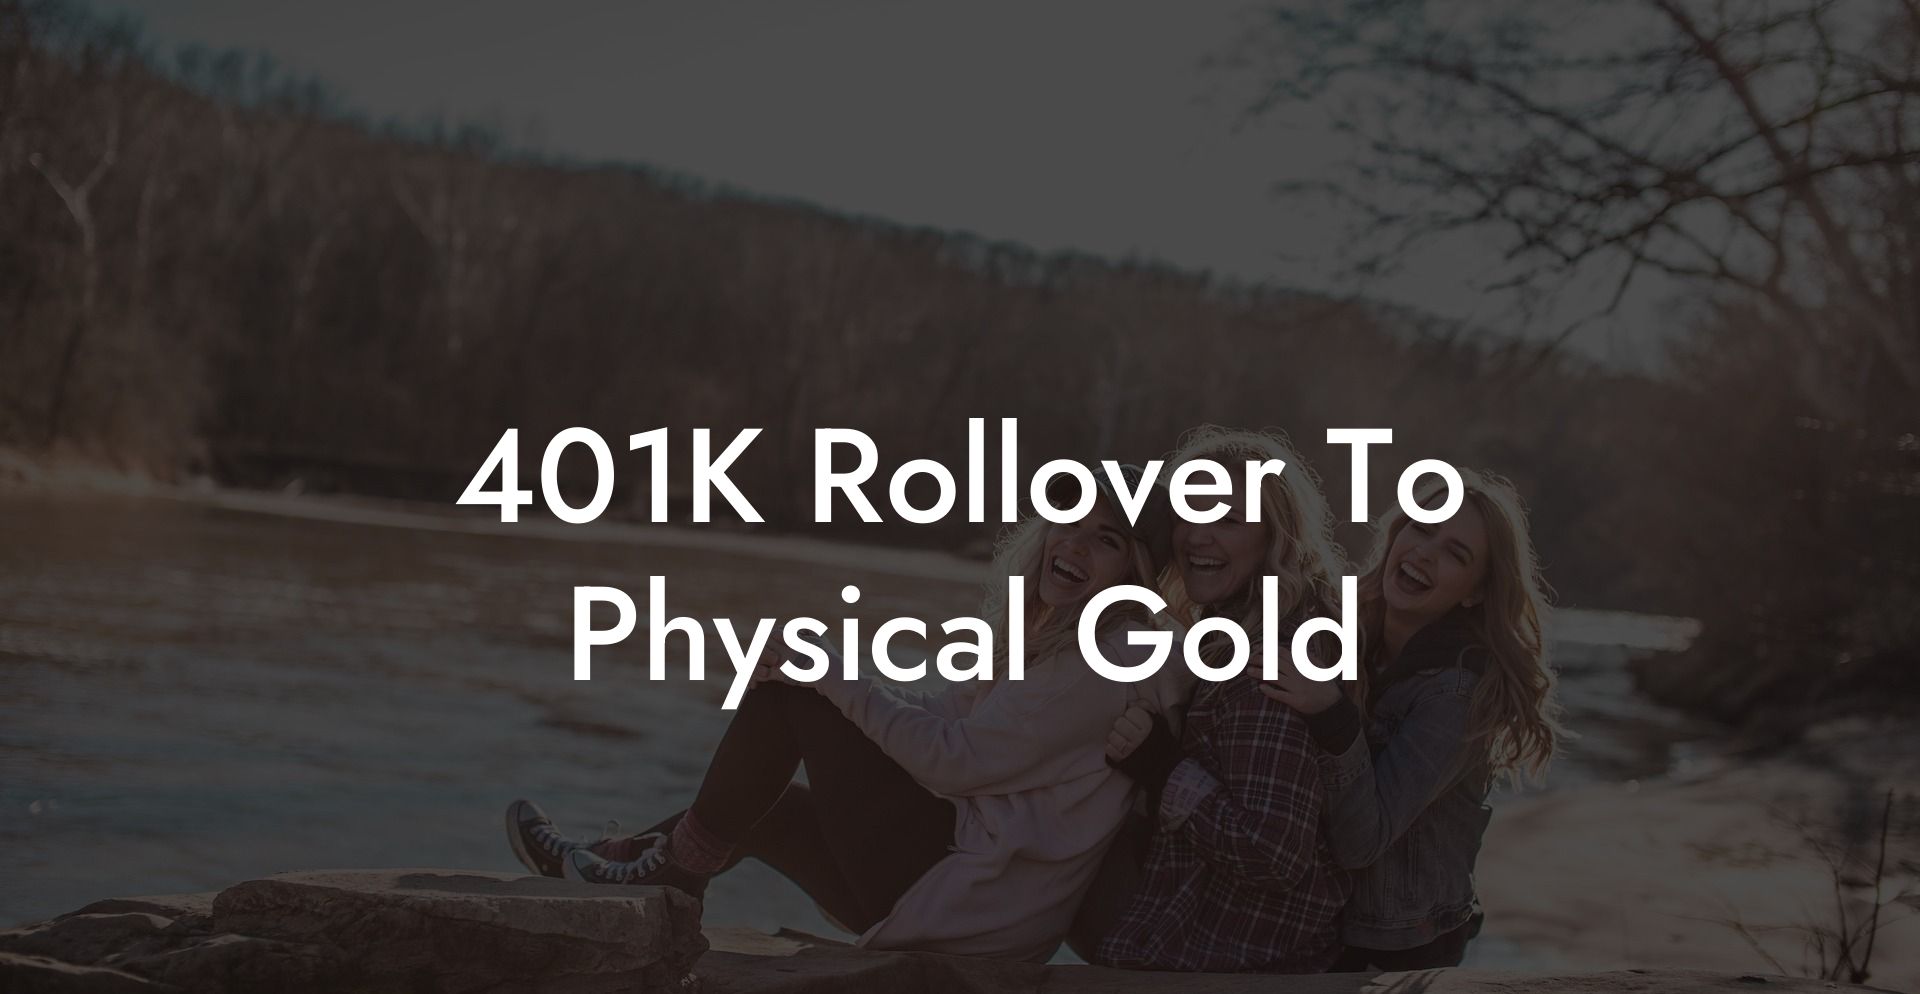 401K Rollover To Physical Gold